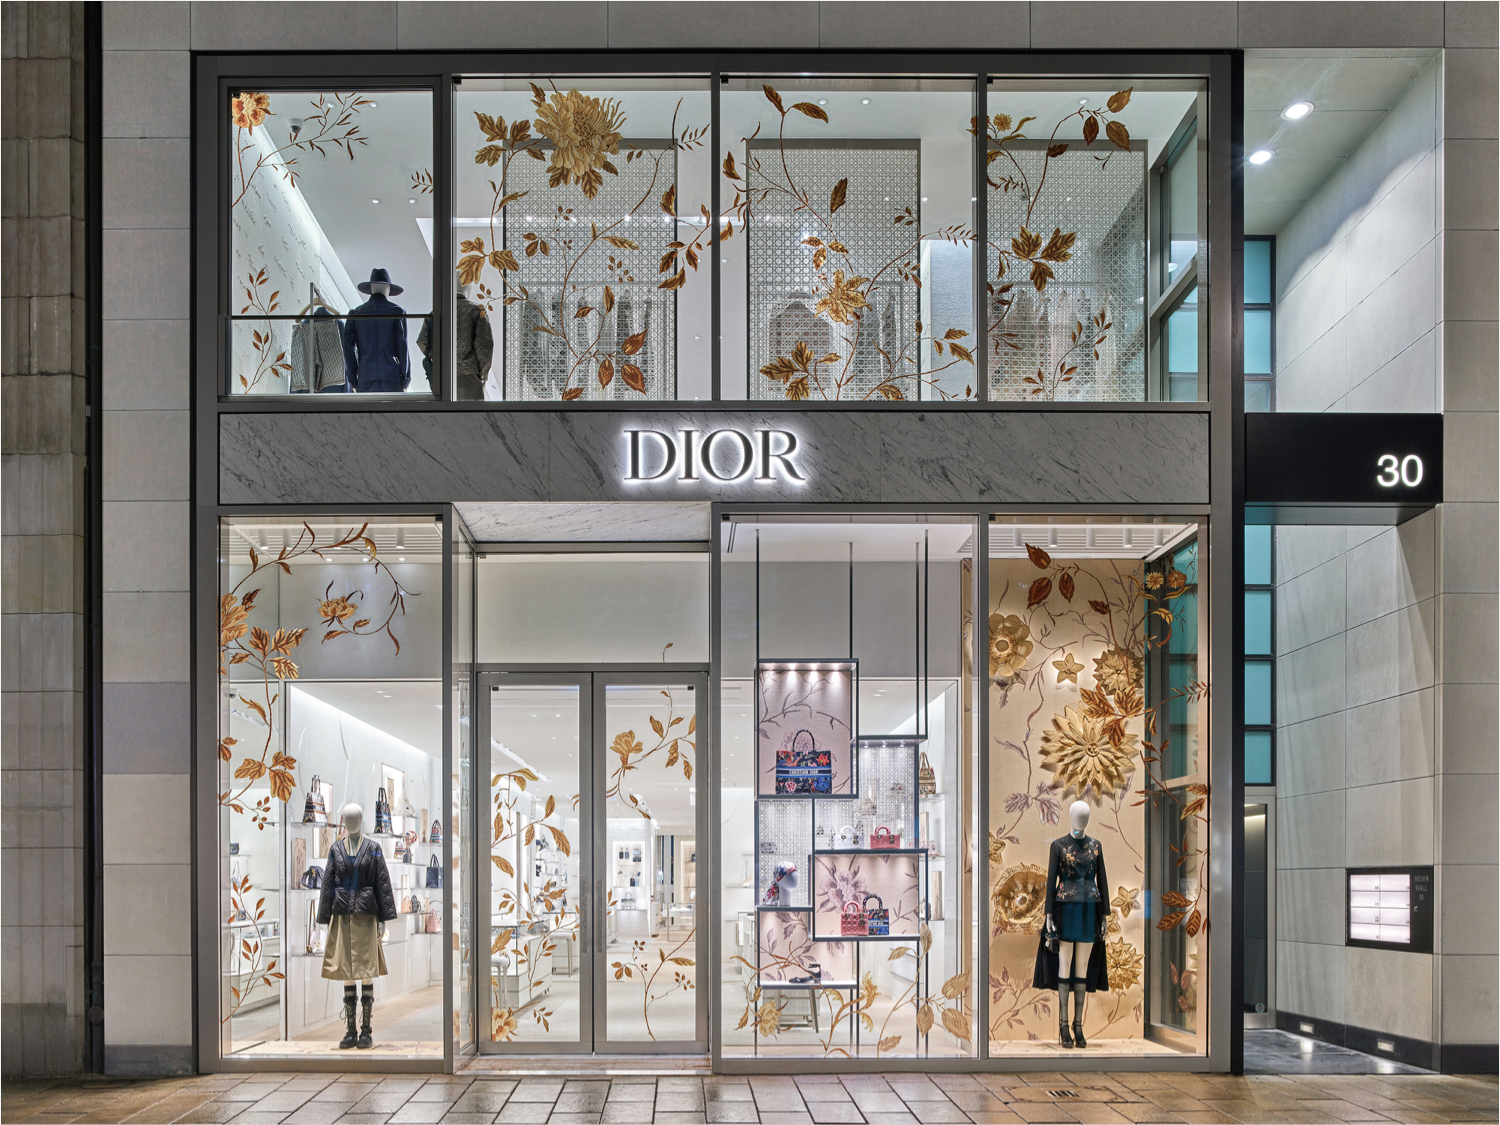 Oslo: Dior store opening